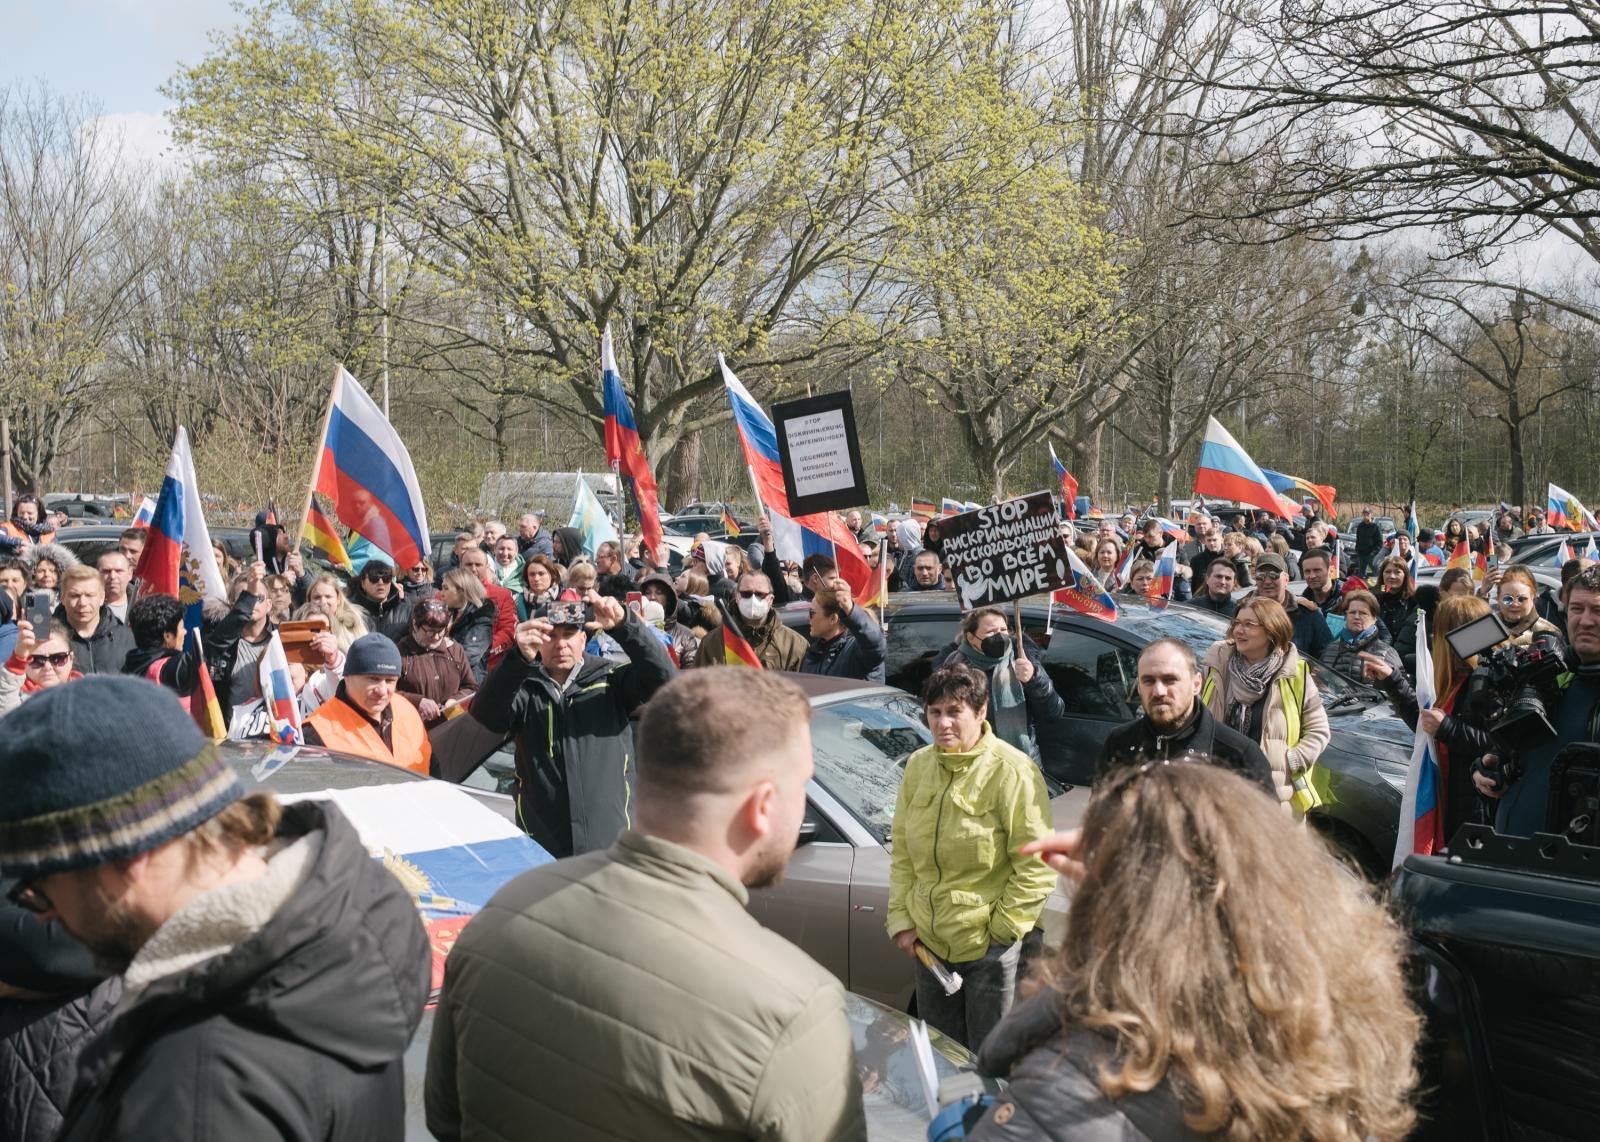 Russian Motorcade in Hanover Blocked - Pro-Russian protestors gather to protest against...